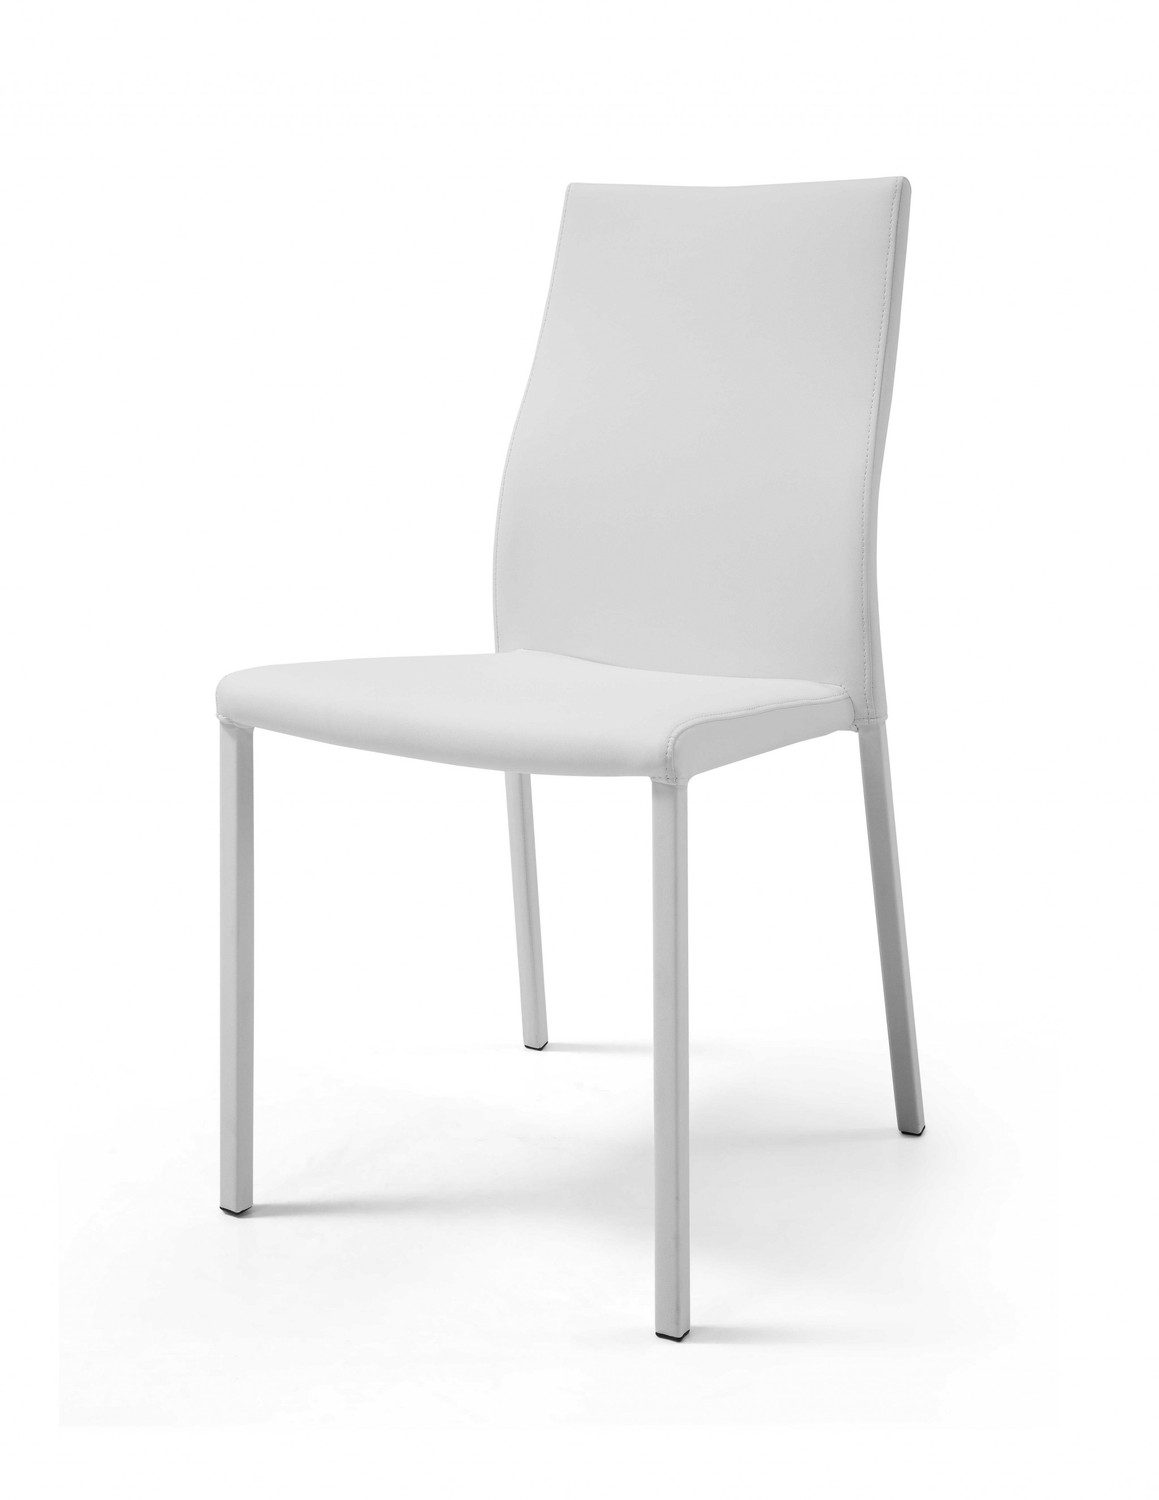 22" X 17" X 36" White Faux Leather or Metal Dining Chair